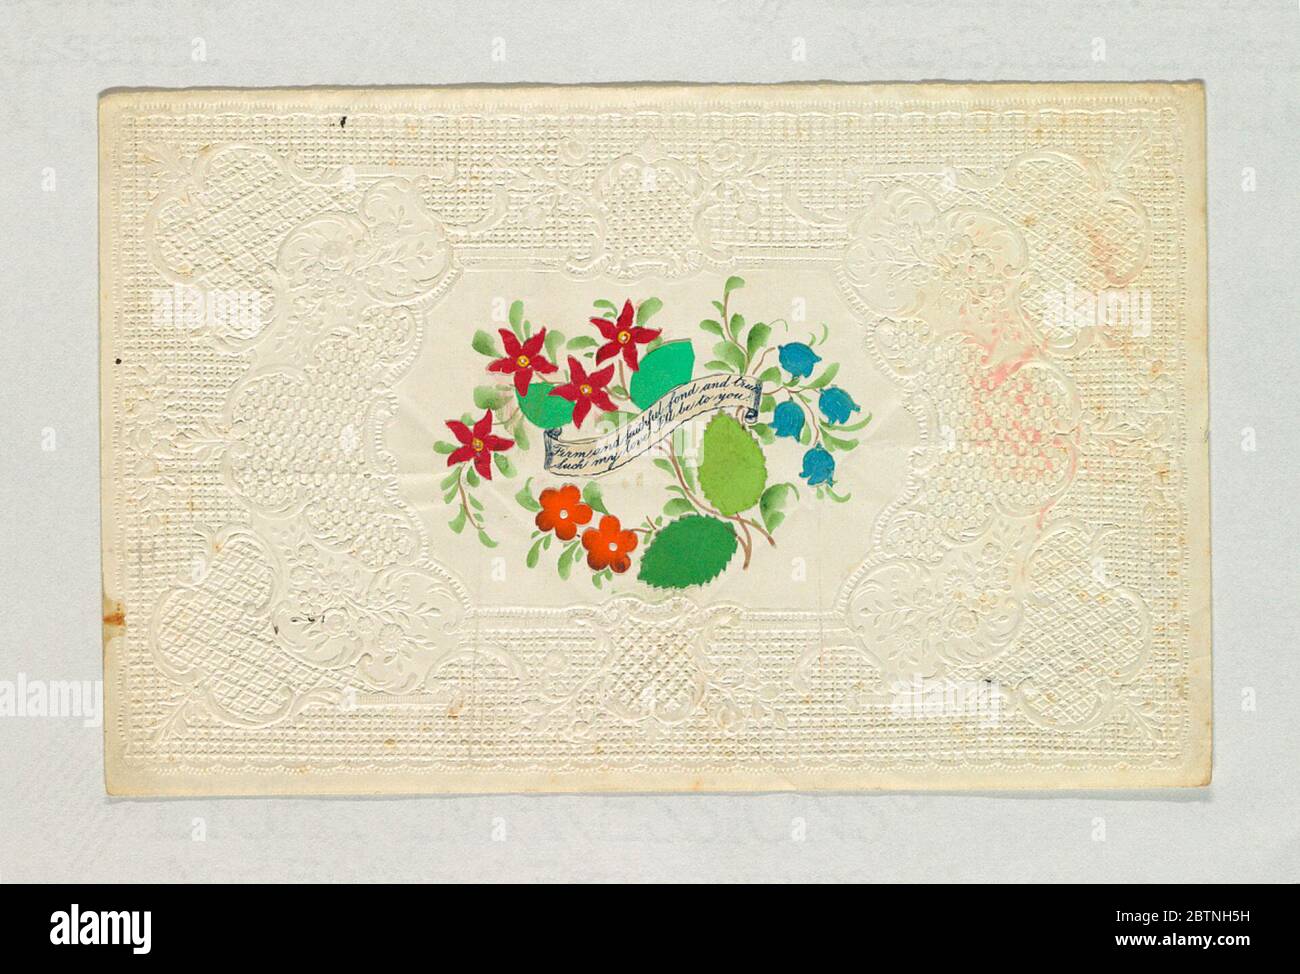 Valentine Greeting. Research in ProgressA bunch of flowers in an embossed paper enframement and in the center a printed inscriptional ribbon: 'Firm and faithful, fond and true / Such my love I'll be with you'. Stock Photo